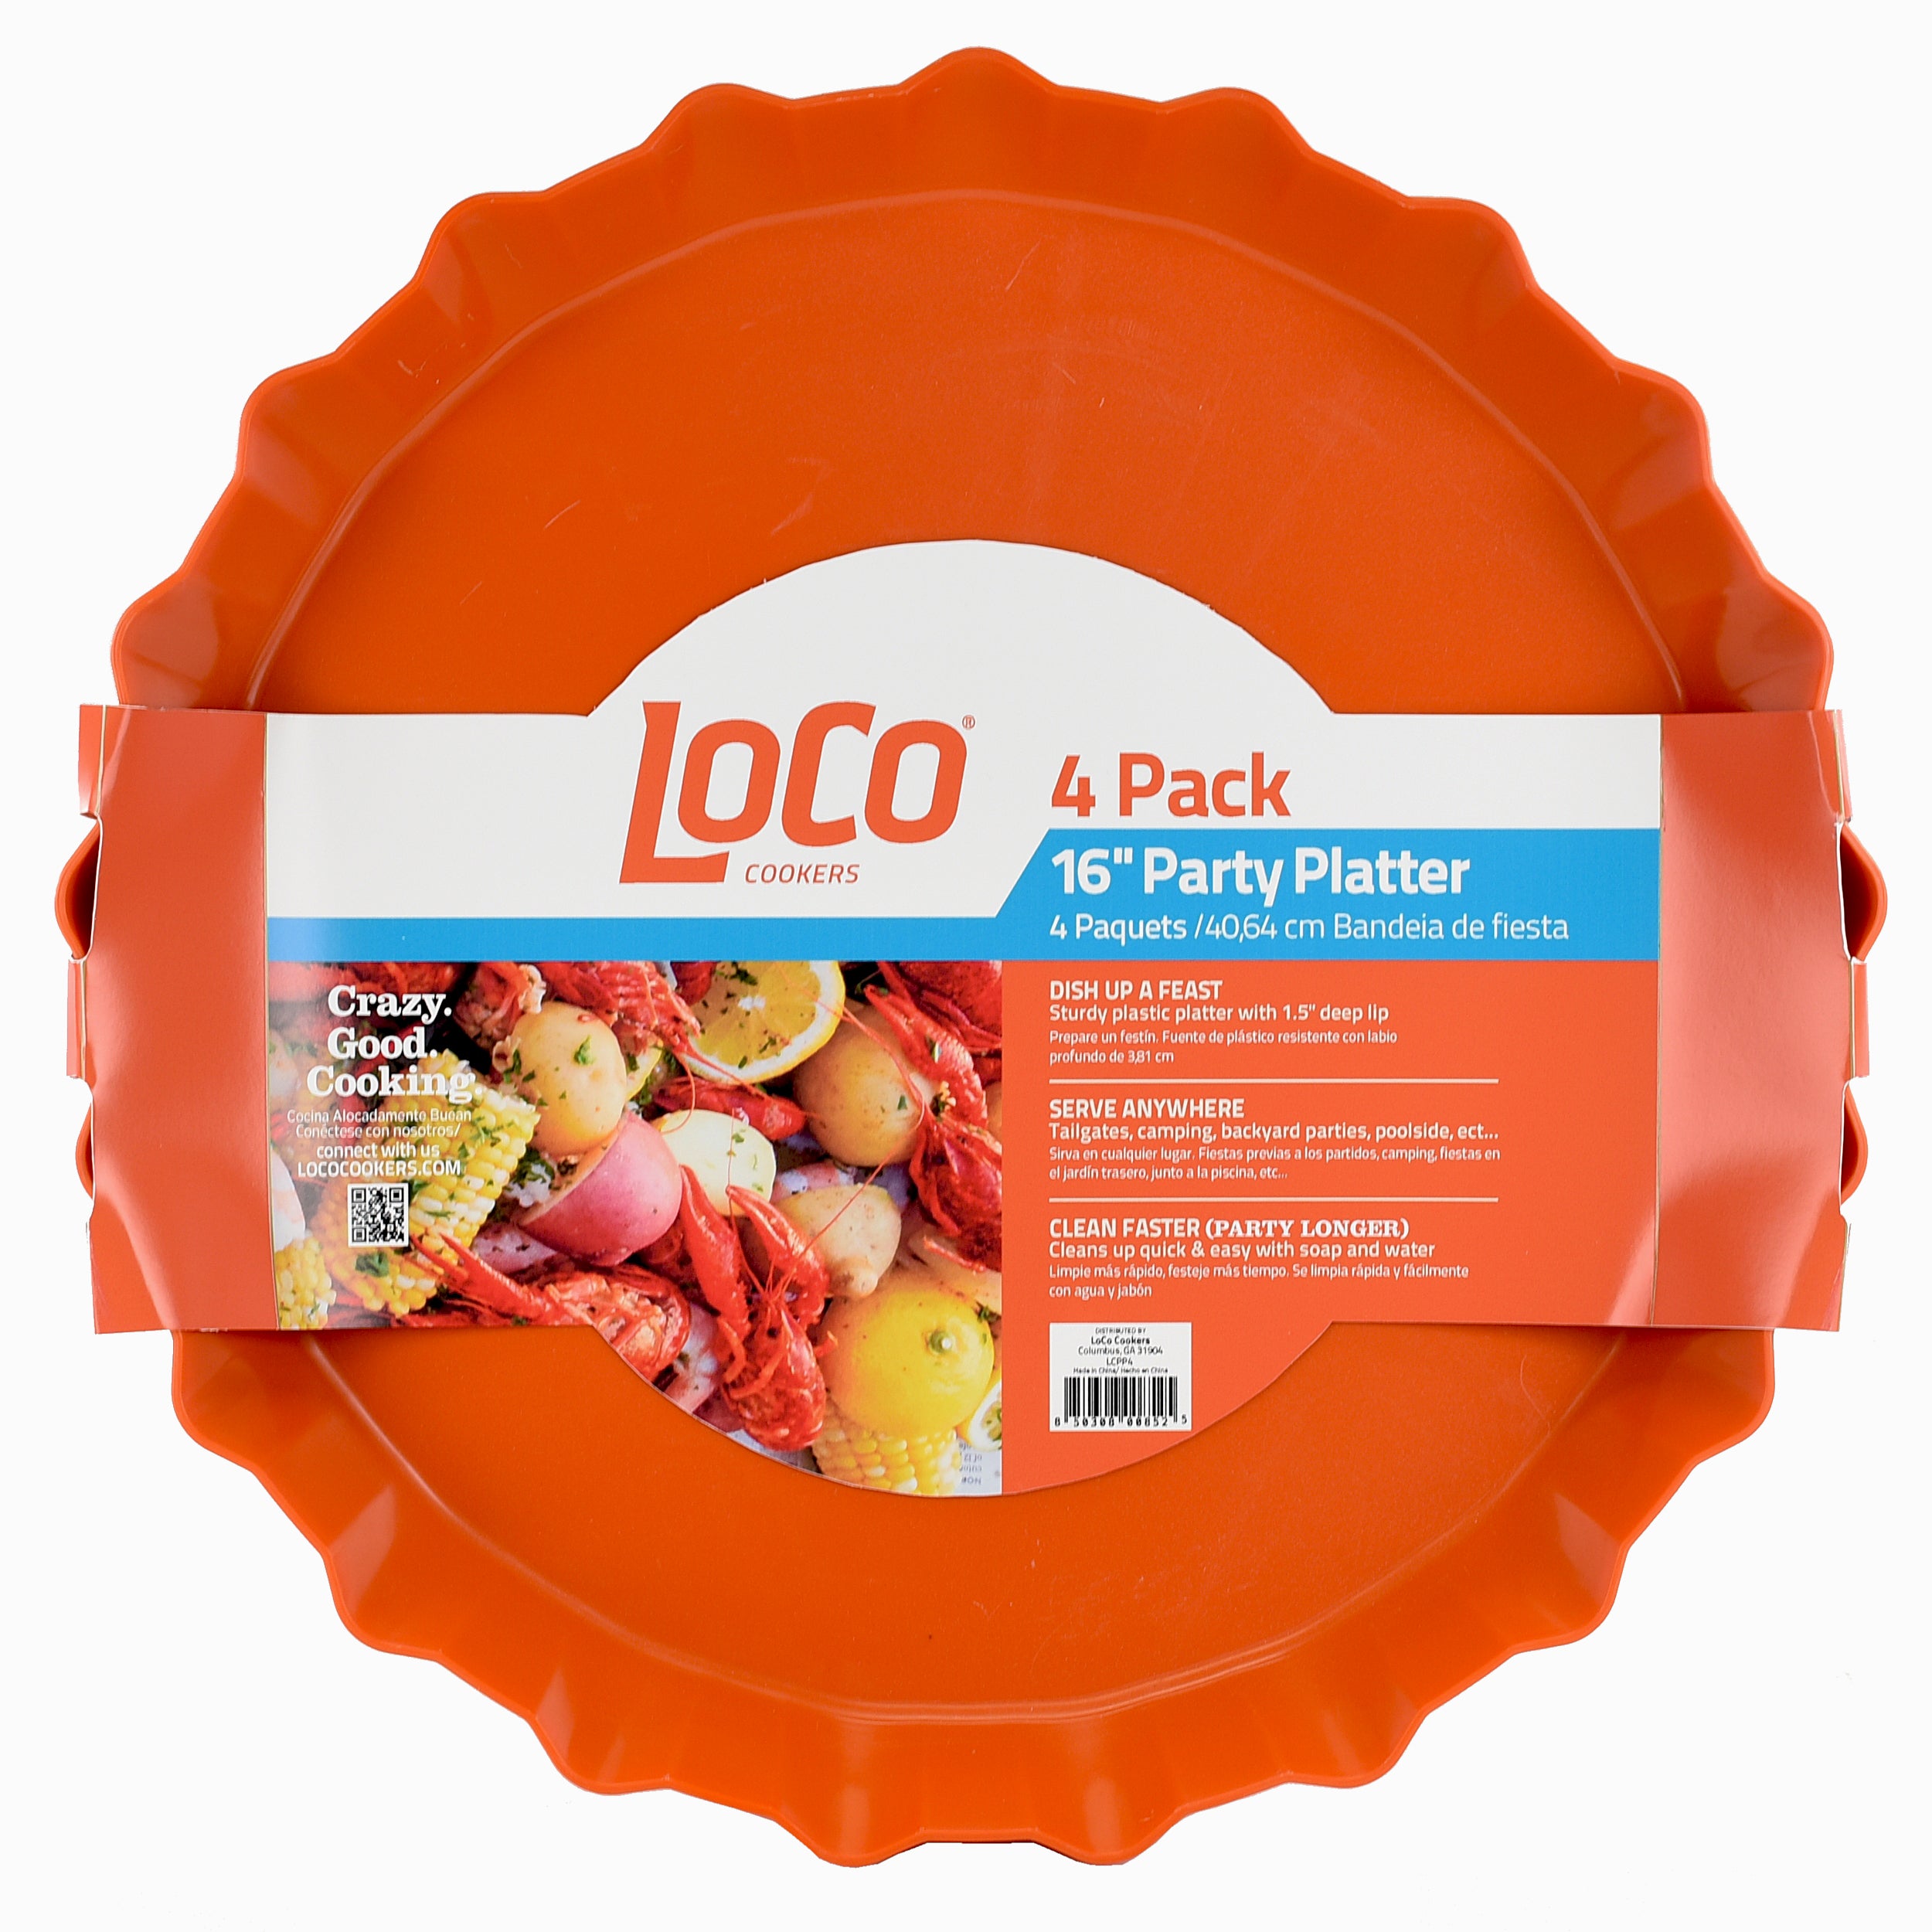 LoCo Party Platter - 4 Pack